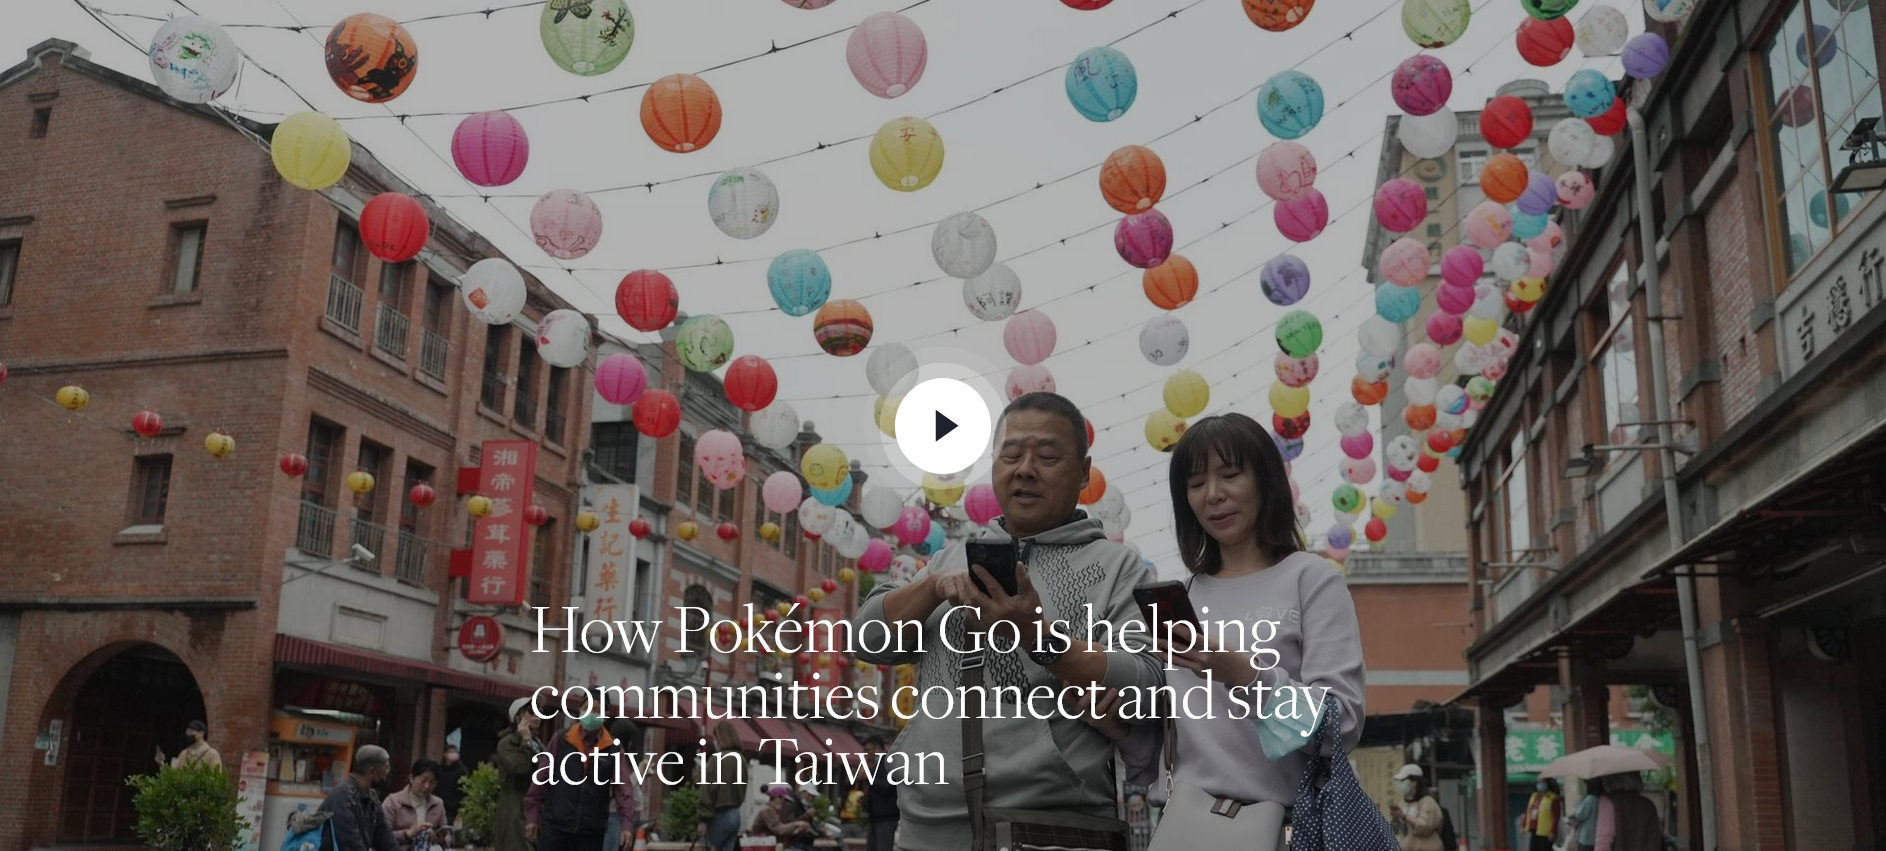 How Pokémon Go is helping communities connect and stay active in Taiwan